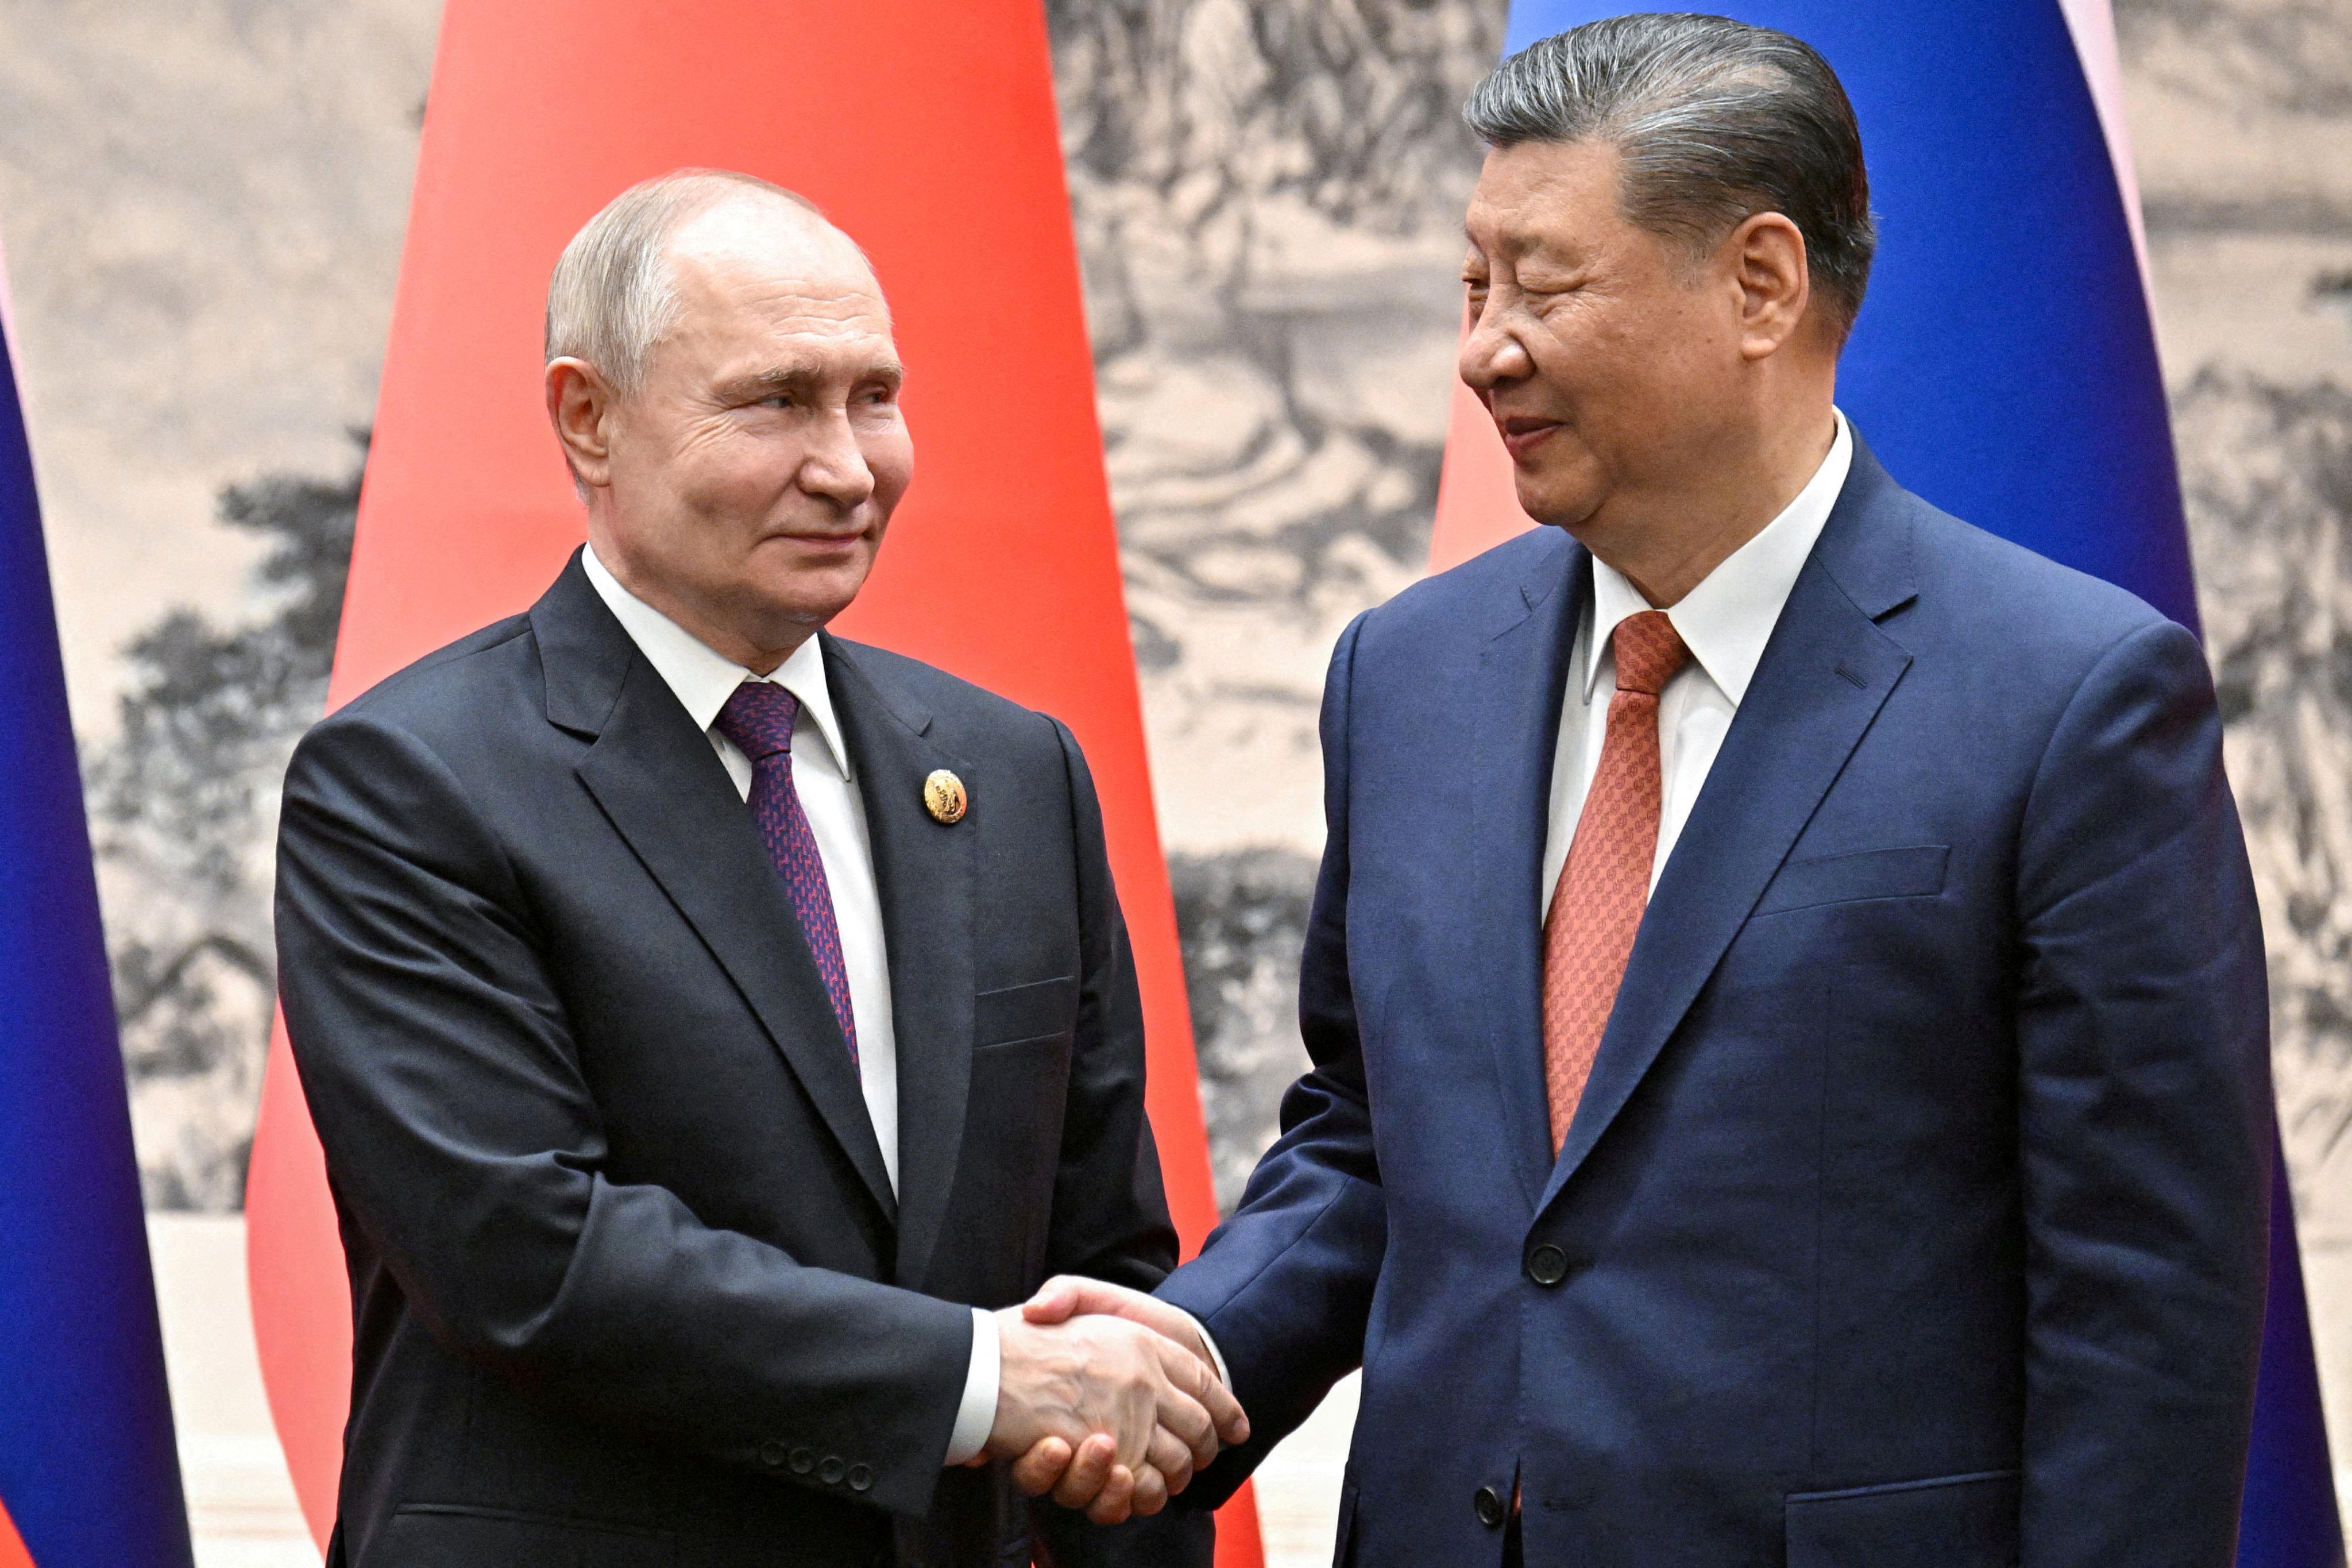 Russian President Vladimir Putin shakes hands with Chinese President Xi Jinping in Beijing. Photo: Reuters